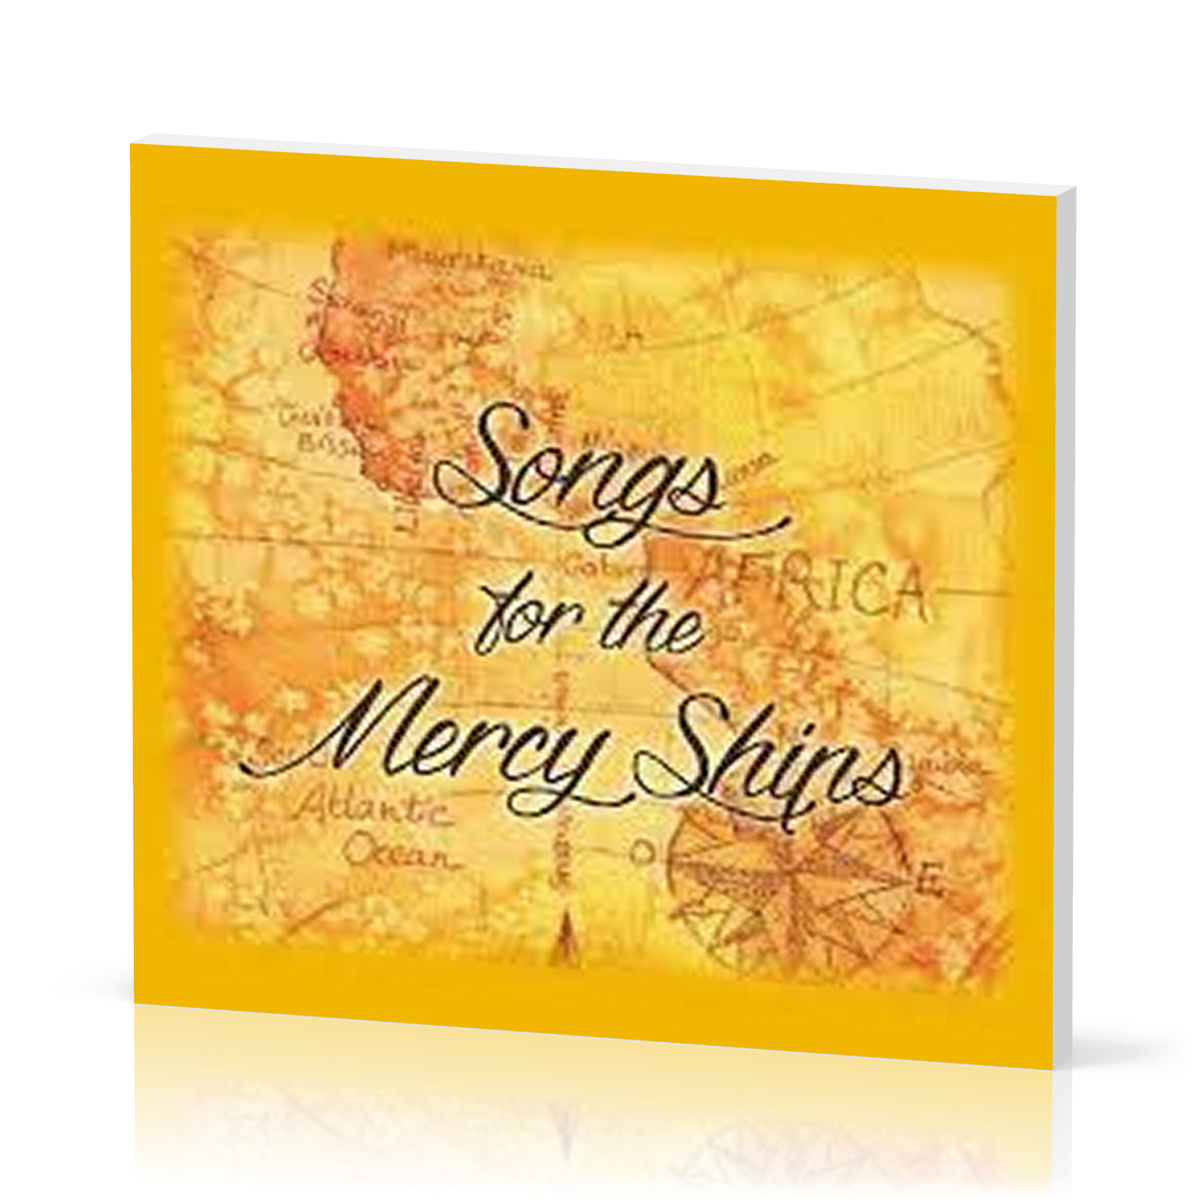 Songs for the Mercy Ships